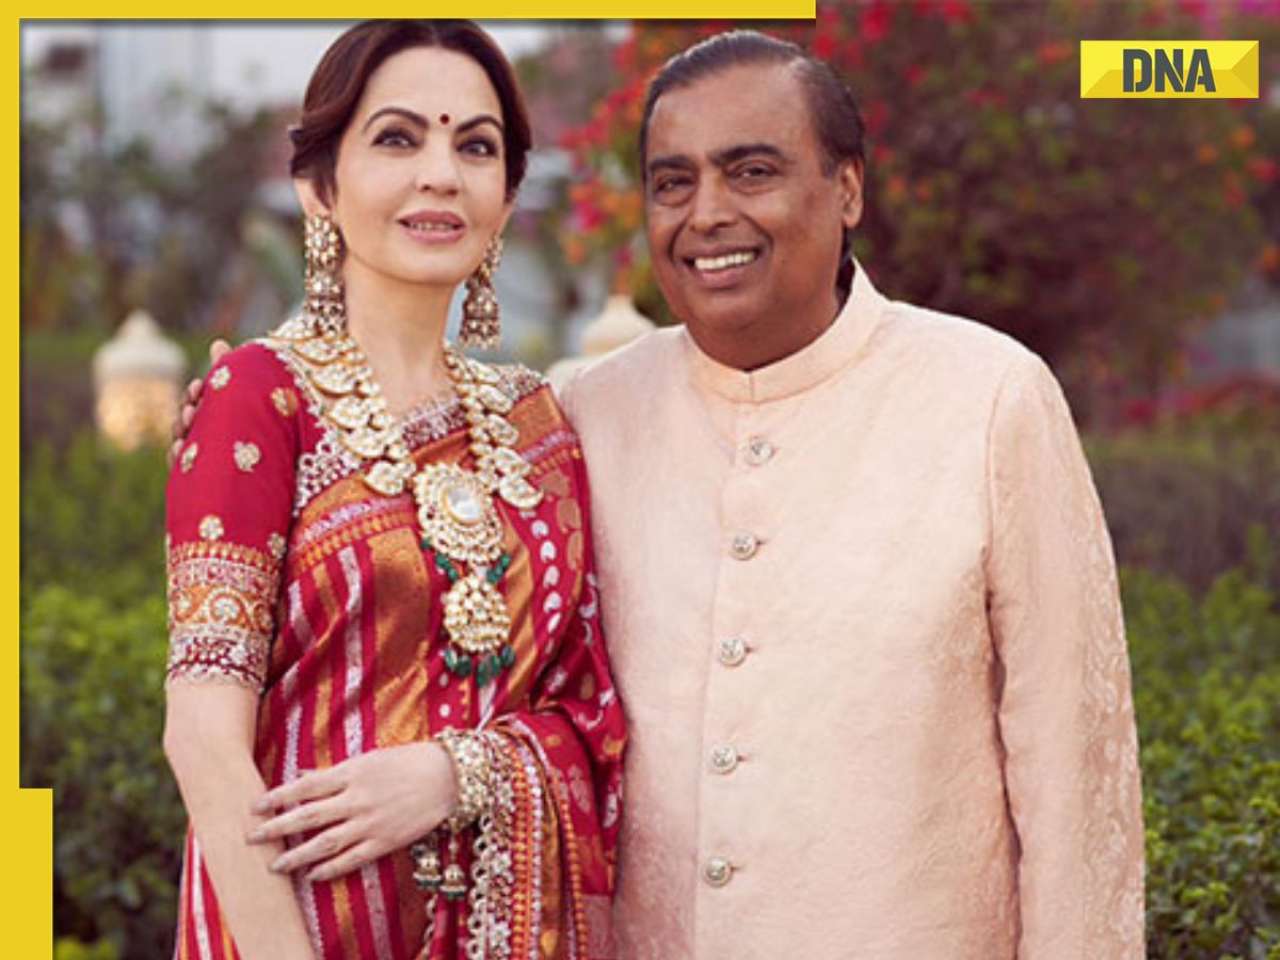 Mukesh Ambani's company did wonders in four days, shareholders earns 45000 crores in just 96 hours